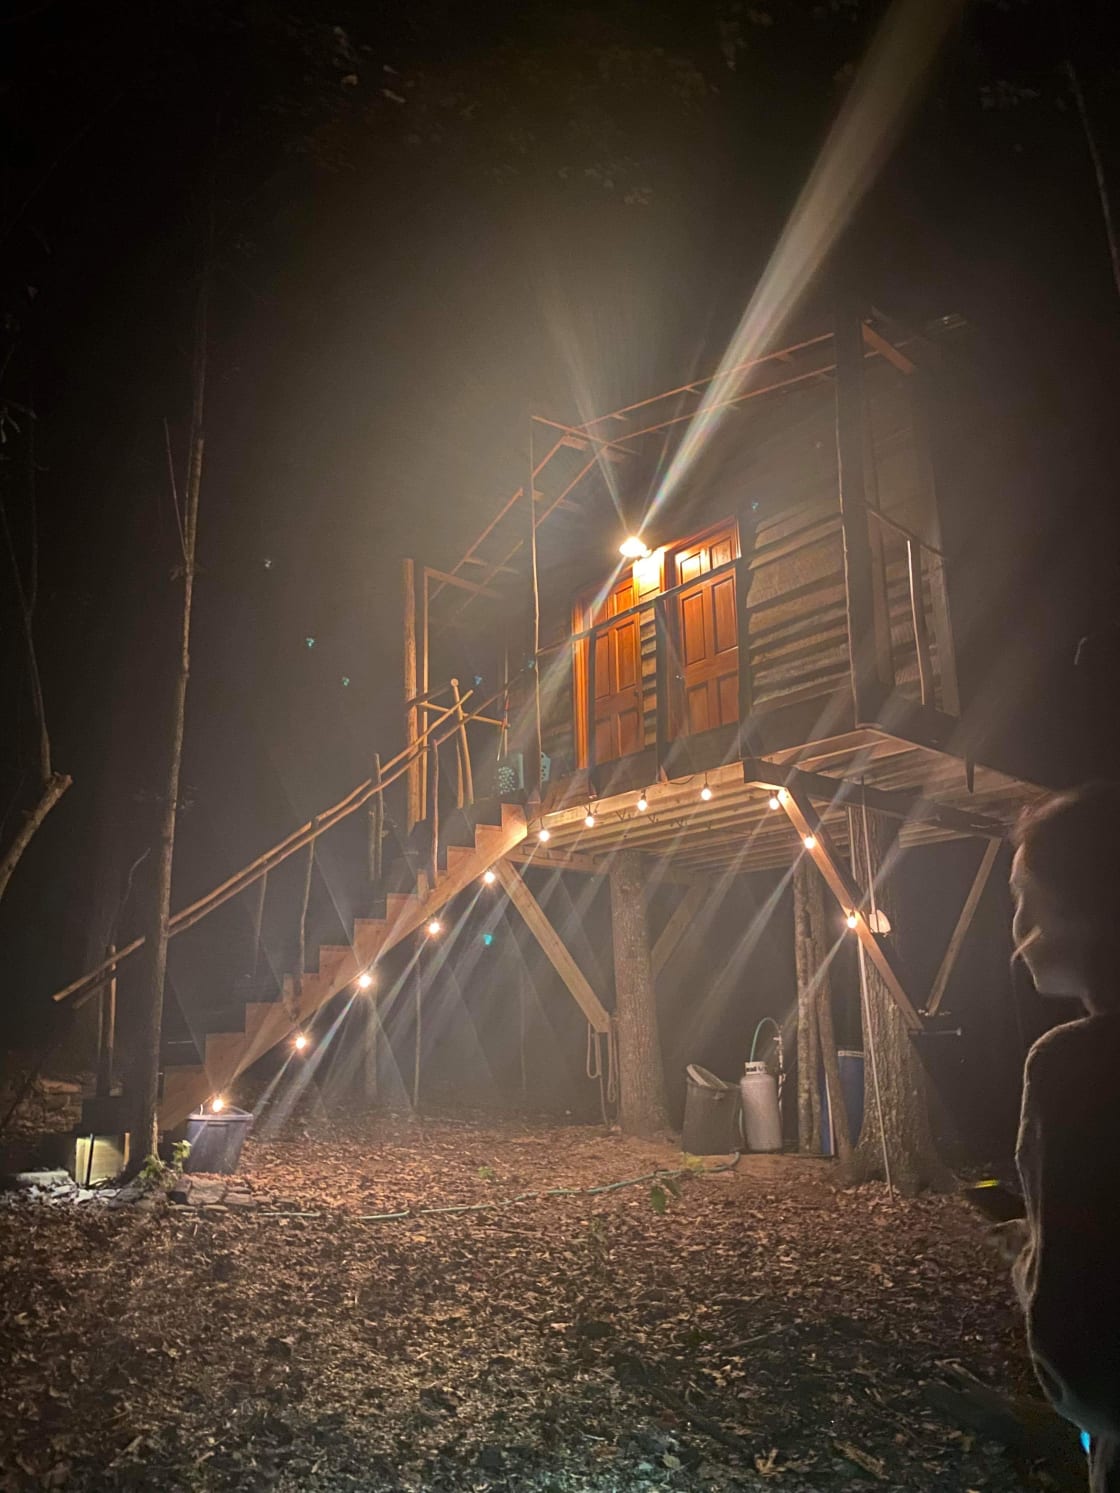 the treehouse shower at night - splurge on this, you won't regret it!